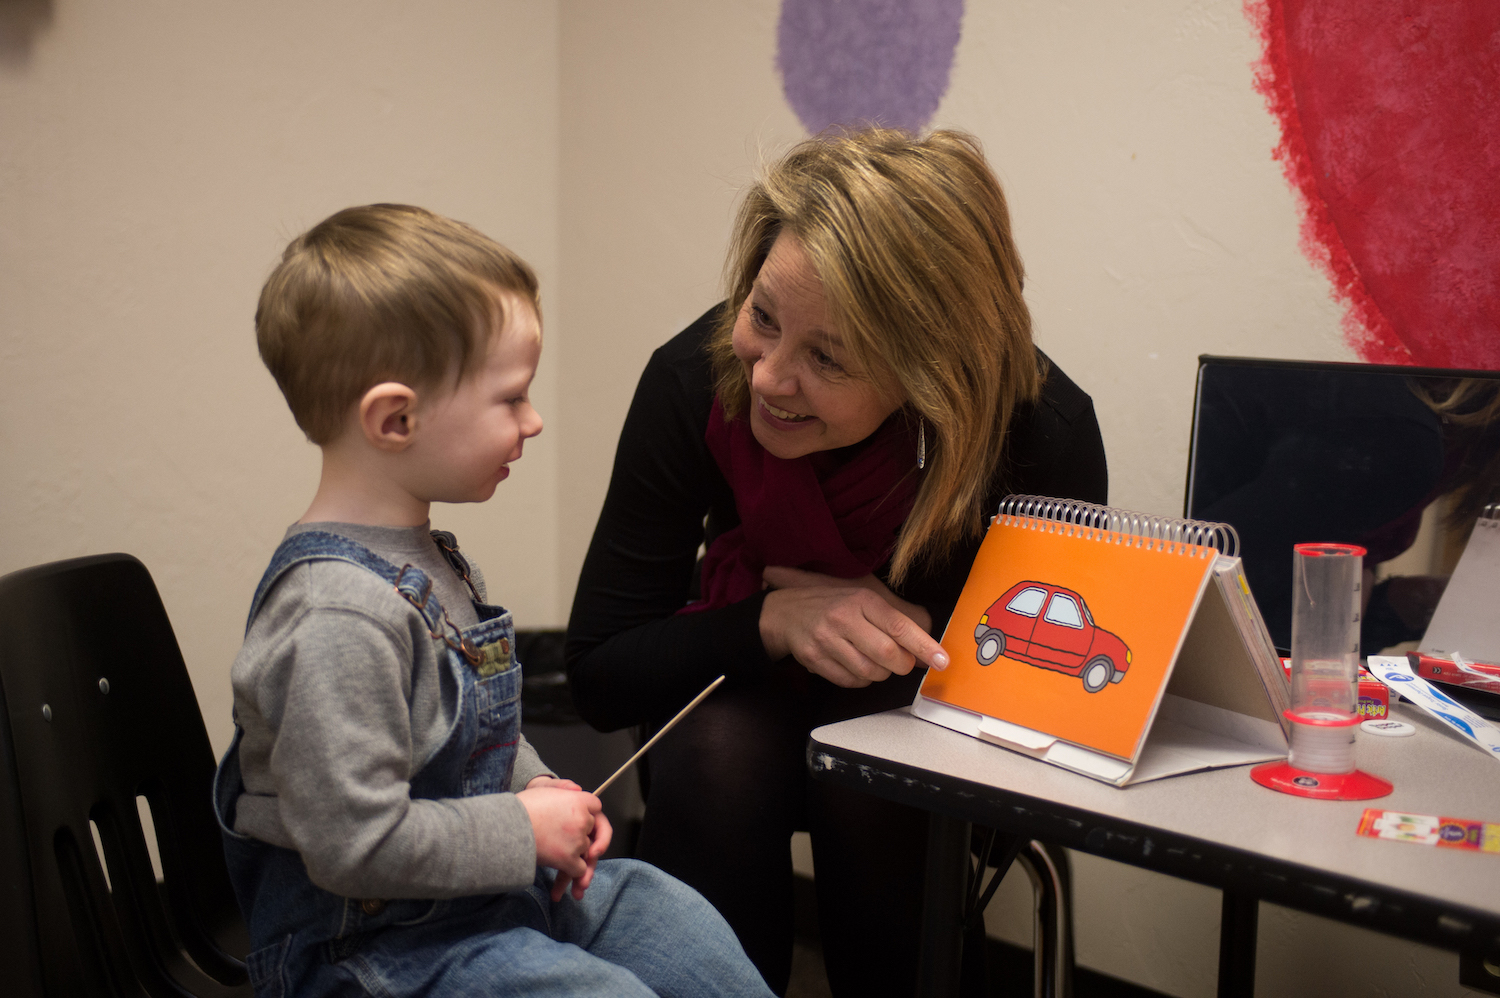 ISU Speech and Language Clinic to provide free treatment for children